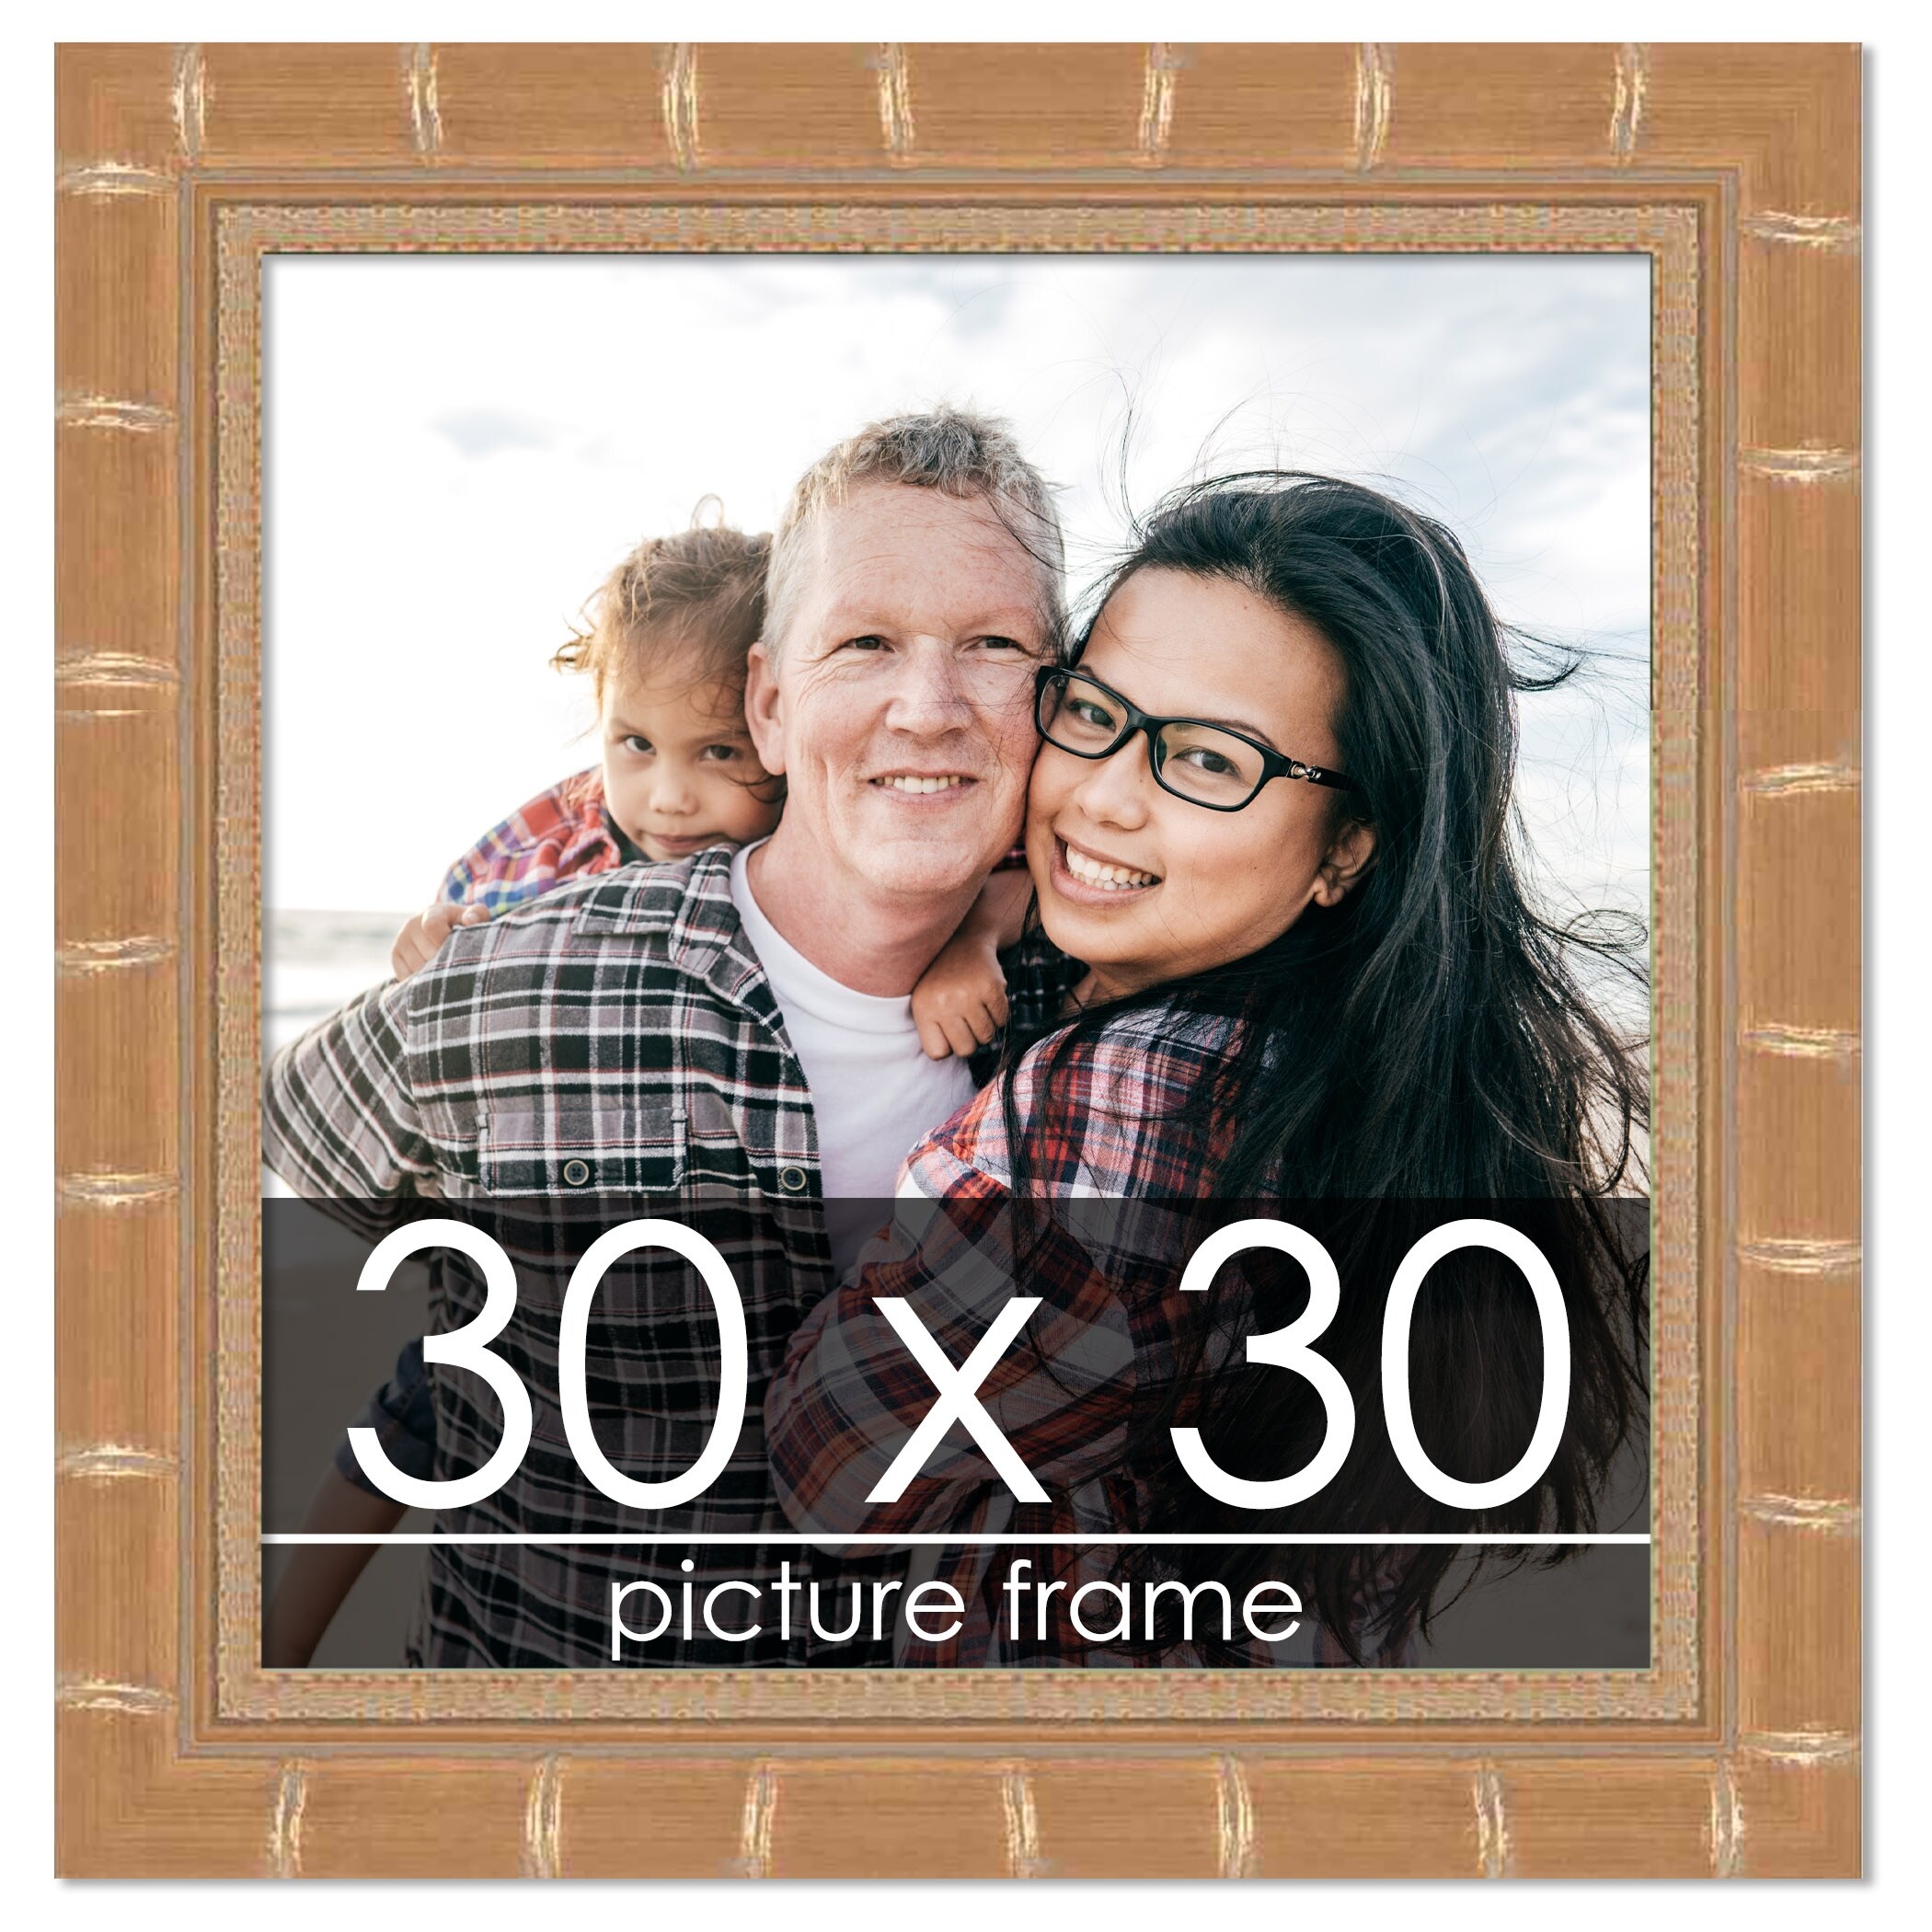  Poster Palooza 30x30 Frame Black Solid Wood Picture Square  Frame Includes UV Acrylic, Foam Board Backing & Hanging Hardware